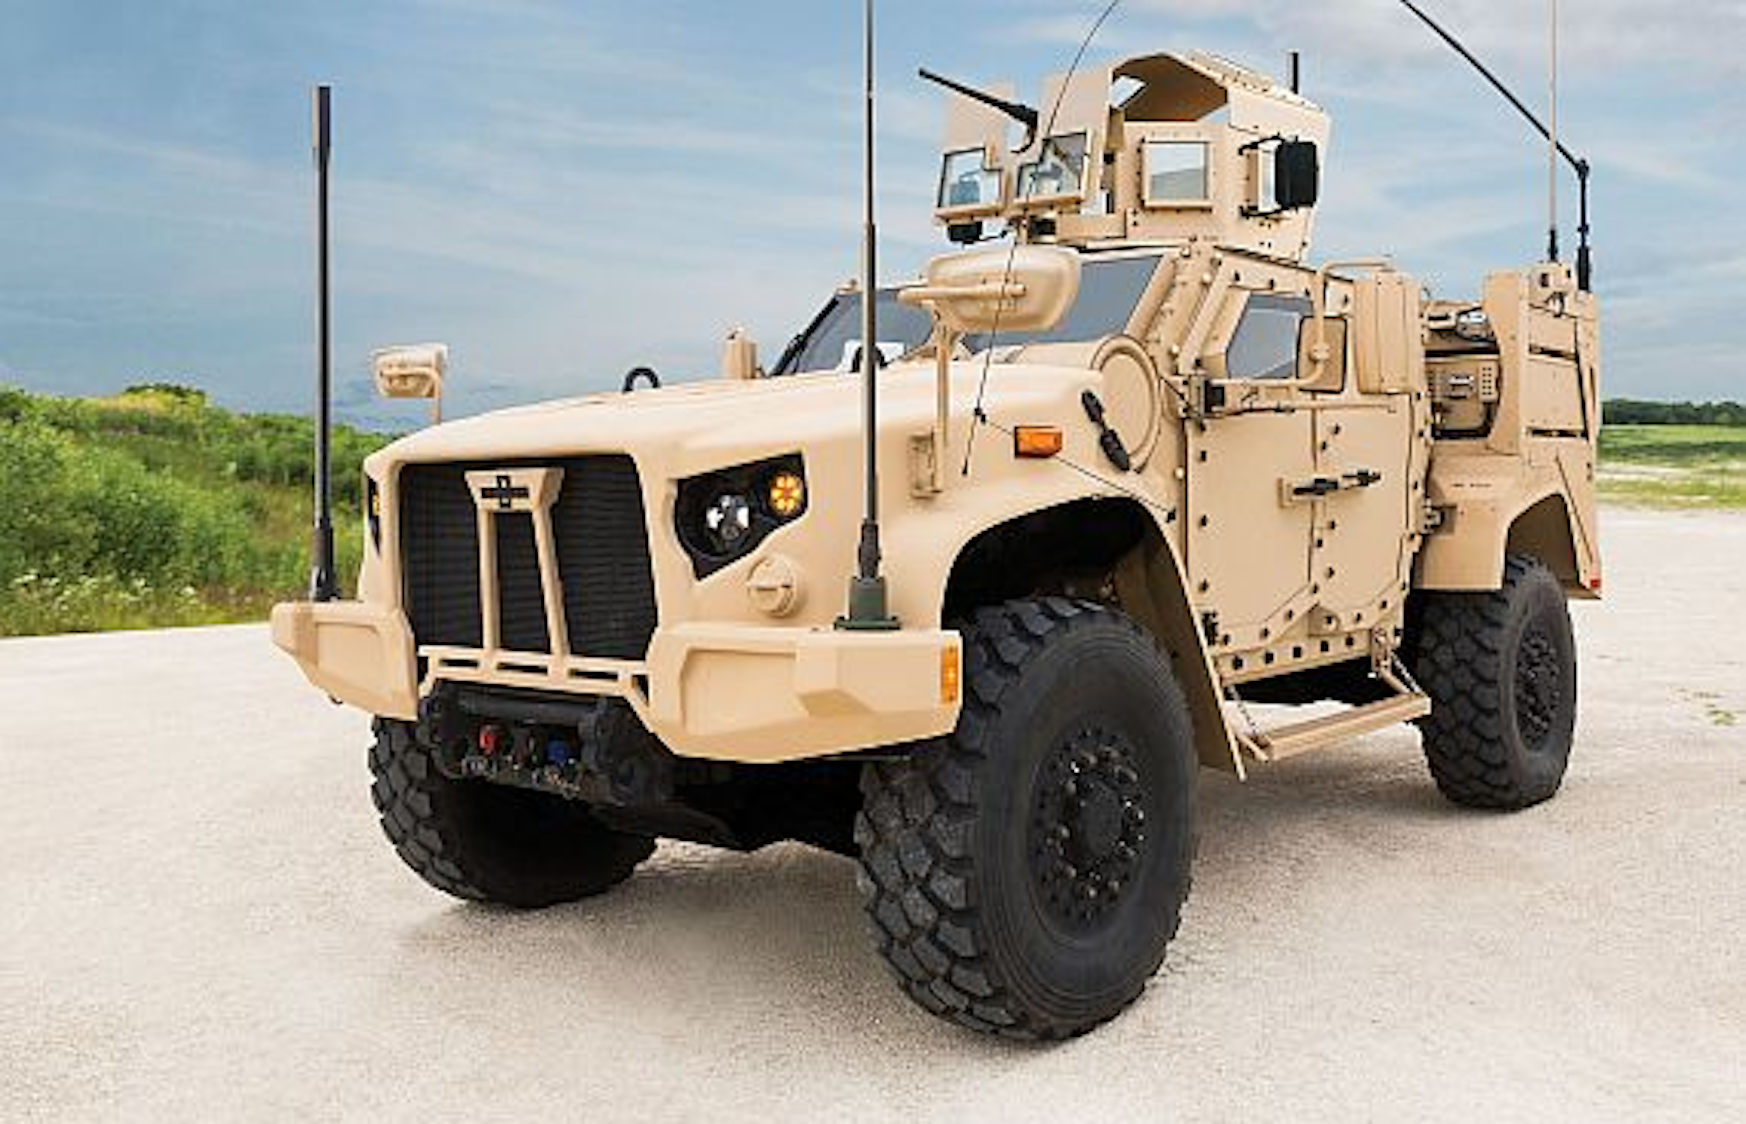 Army orders 6,107 JLTV combat vehicles with opensystems vetronics in